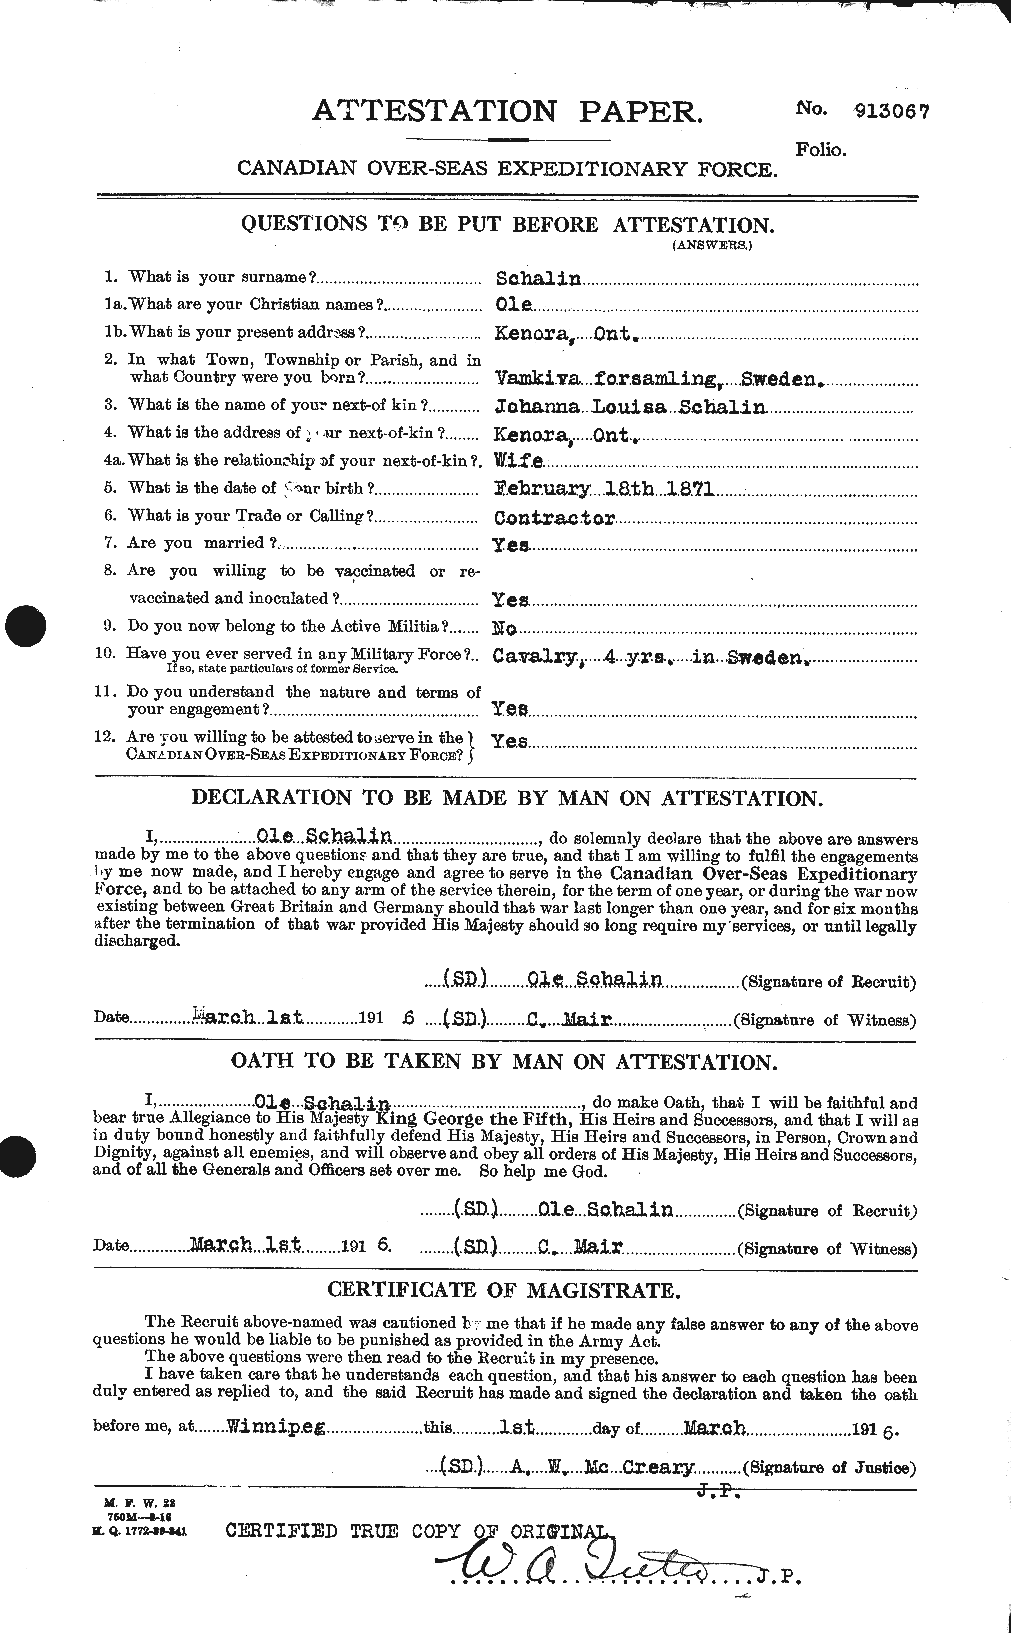 Personnel Records of the First World War - CEF 081305a